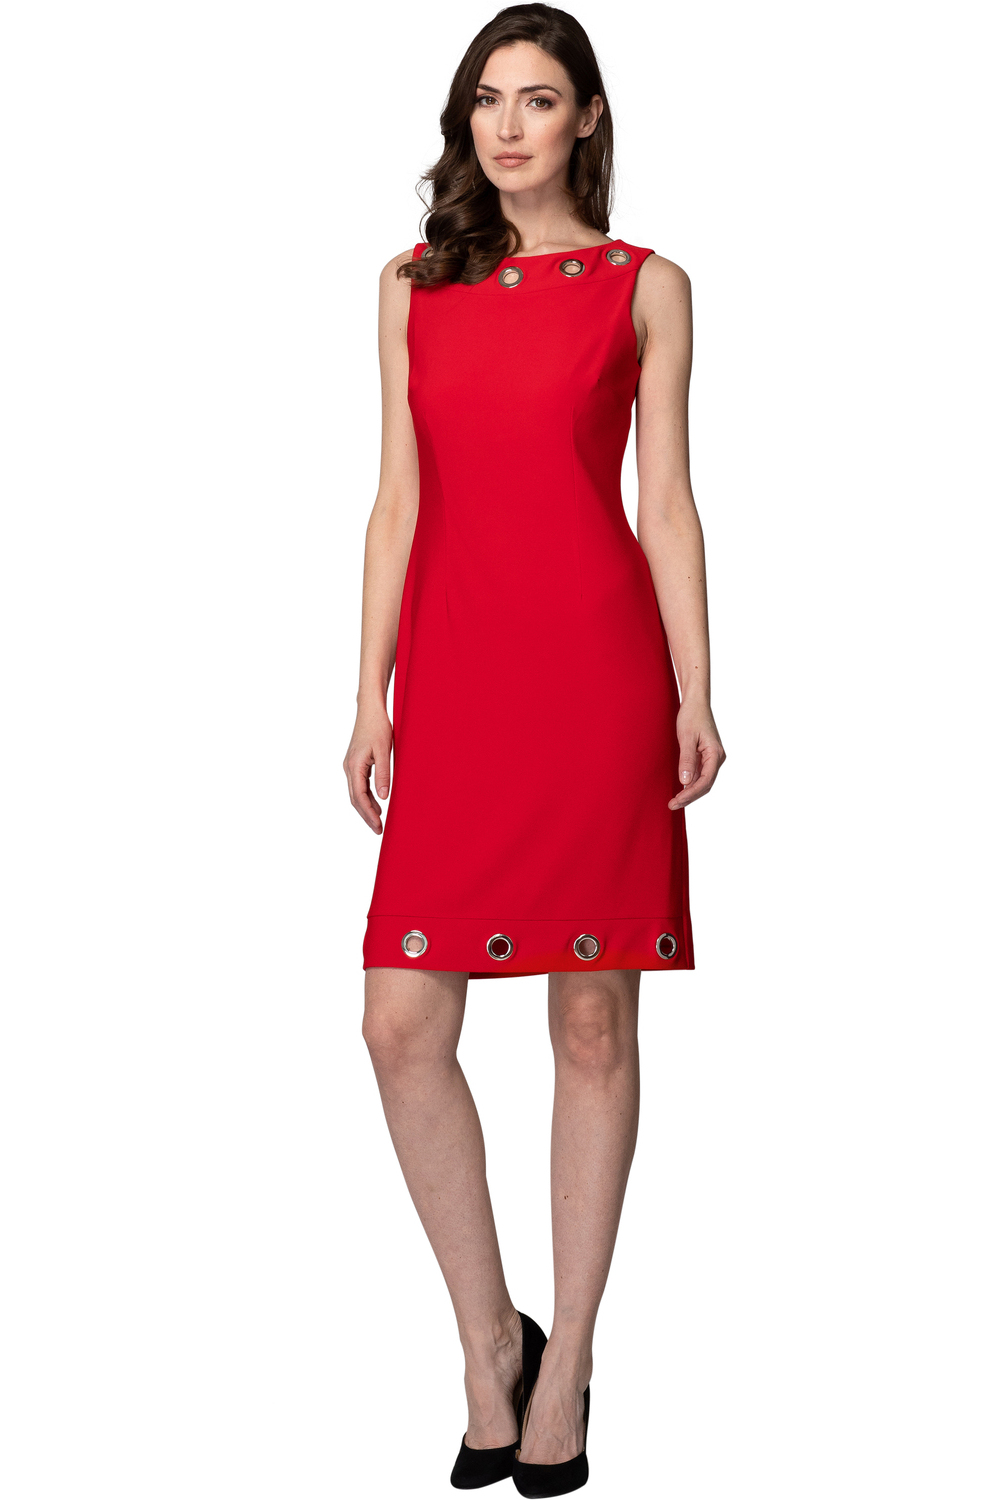 Joseph Ribkoff robe style 191021. Rouge A Levres 173